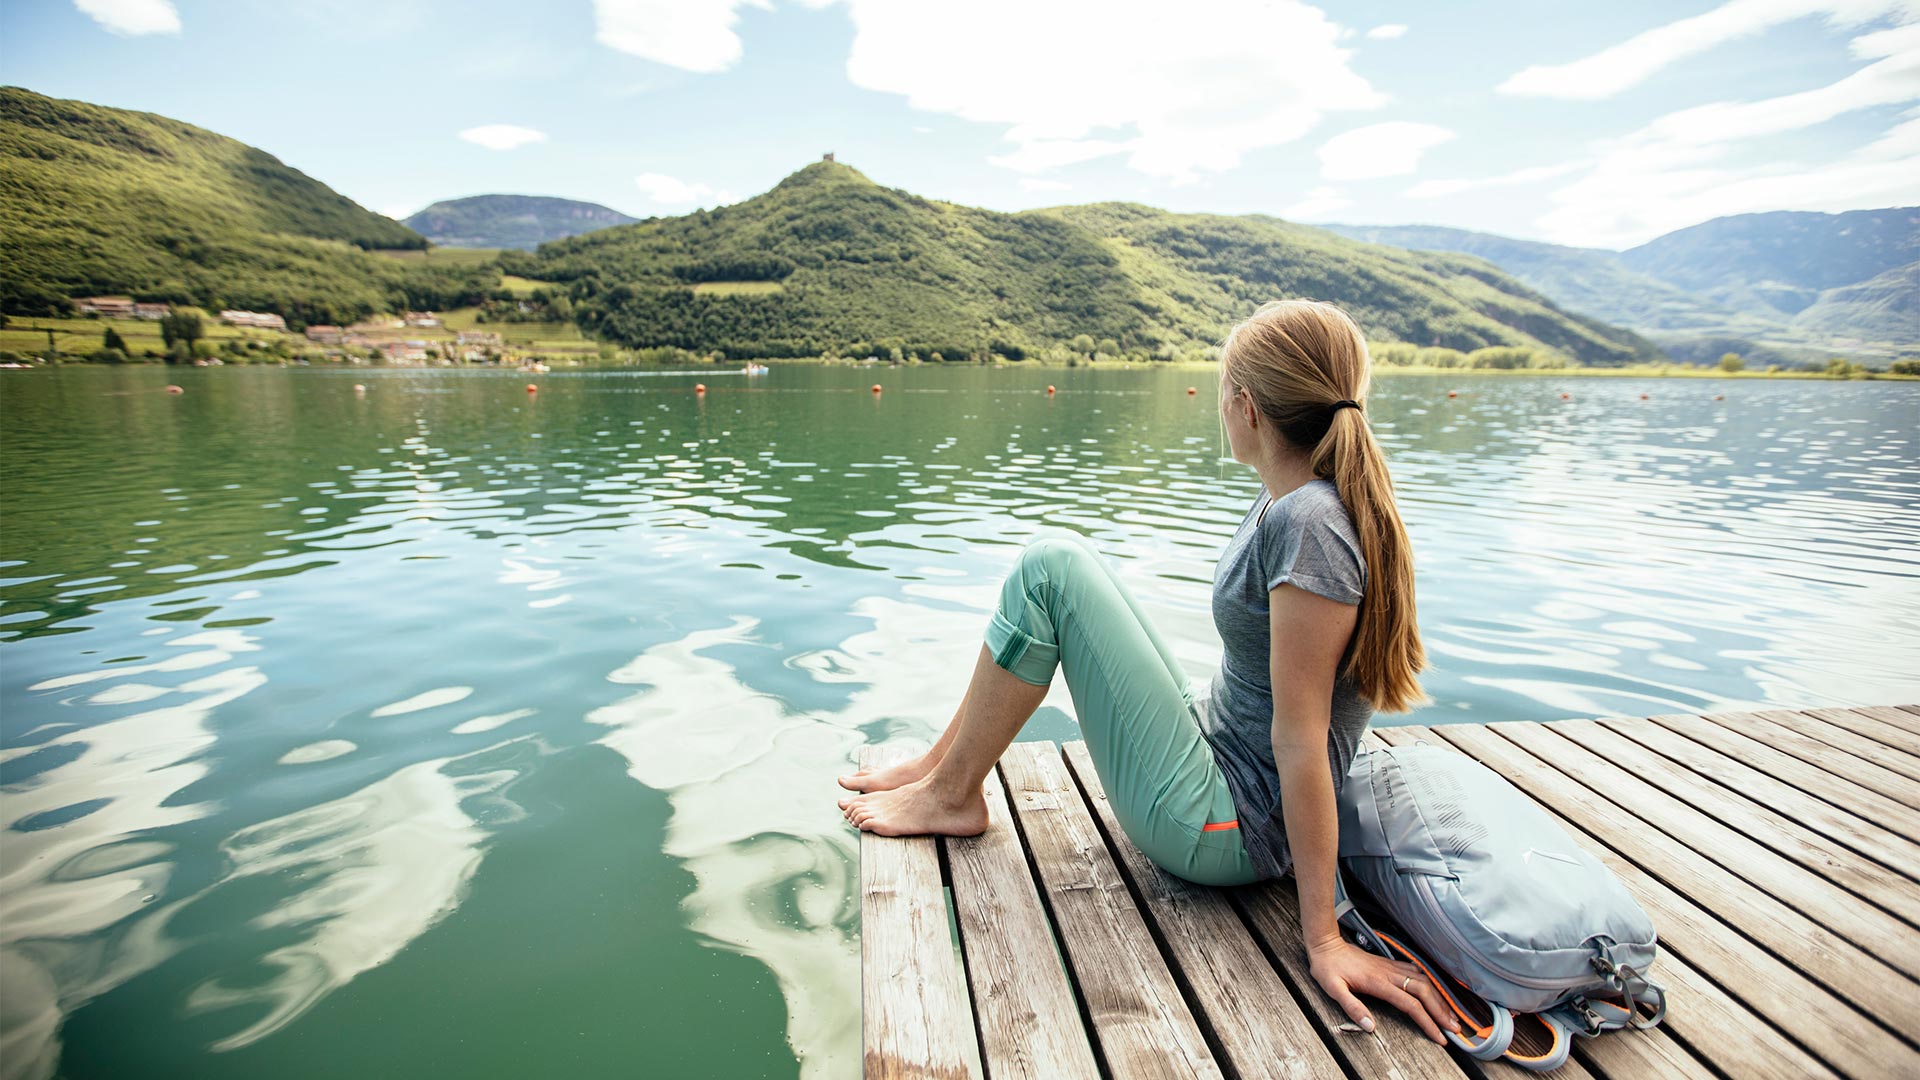 A girl sitting on the quay of Lake Caldaro looks at the village on the other side of the lake and the boats passing by.